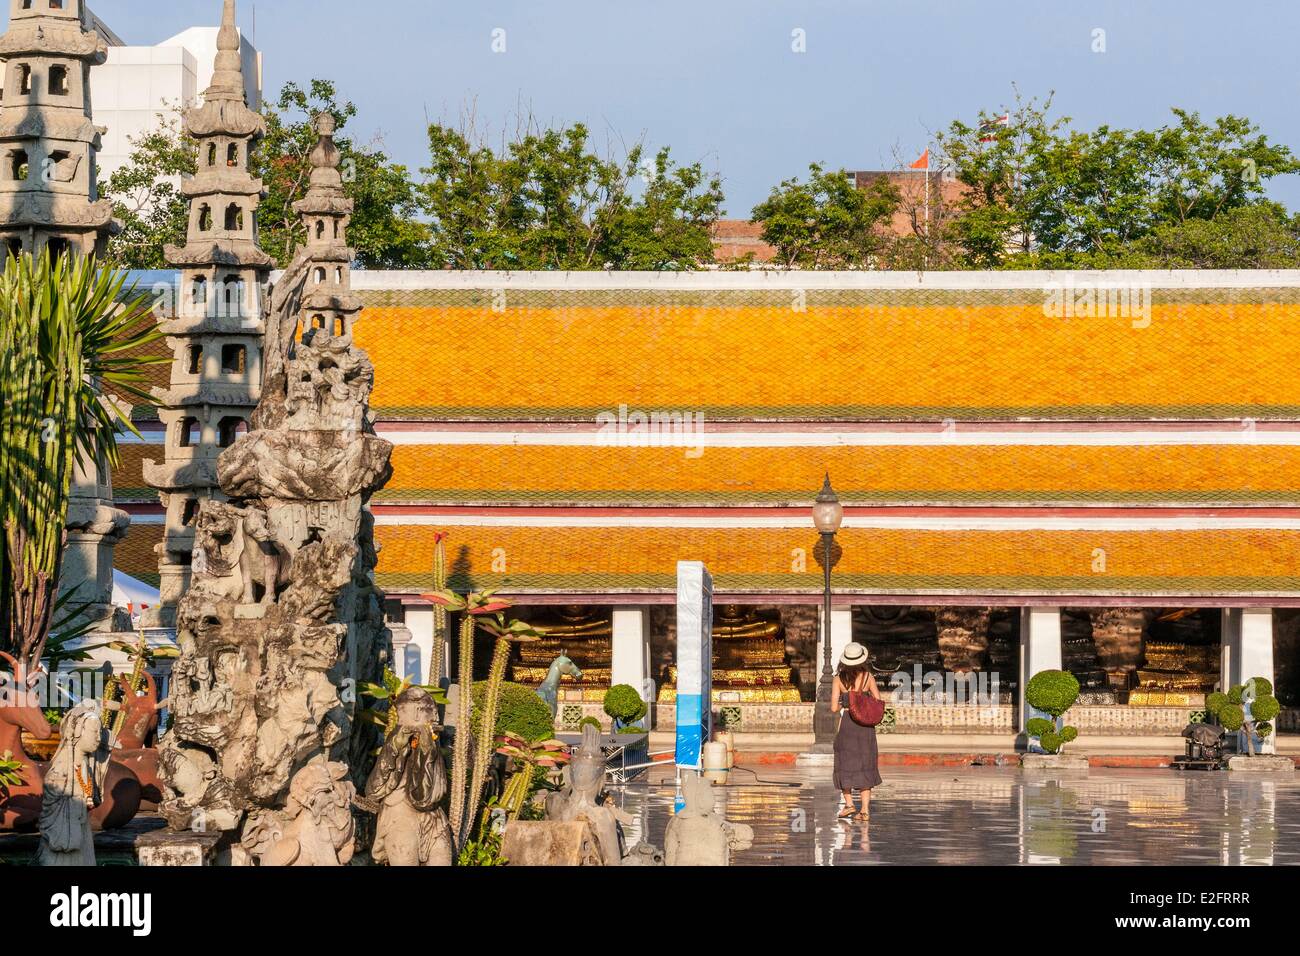 Thailand Bangkok Wat Suthat the Giant Swing temple dates from the early 19th century is one of six royal temples of the country Stock Photo